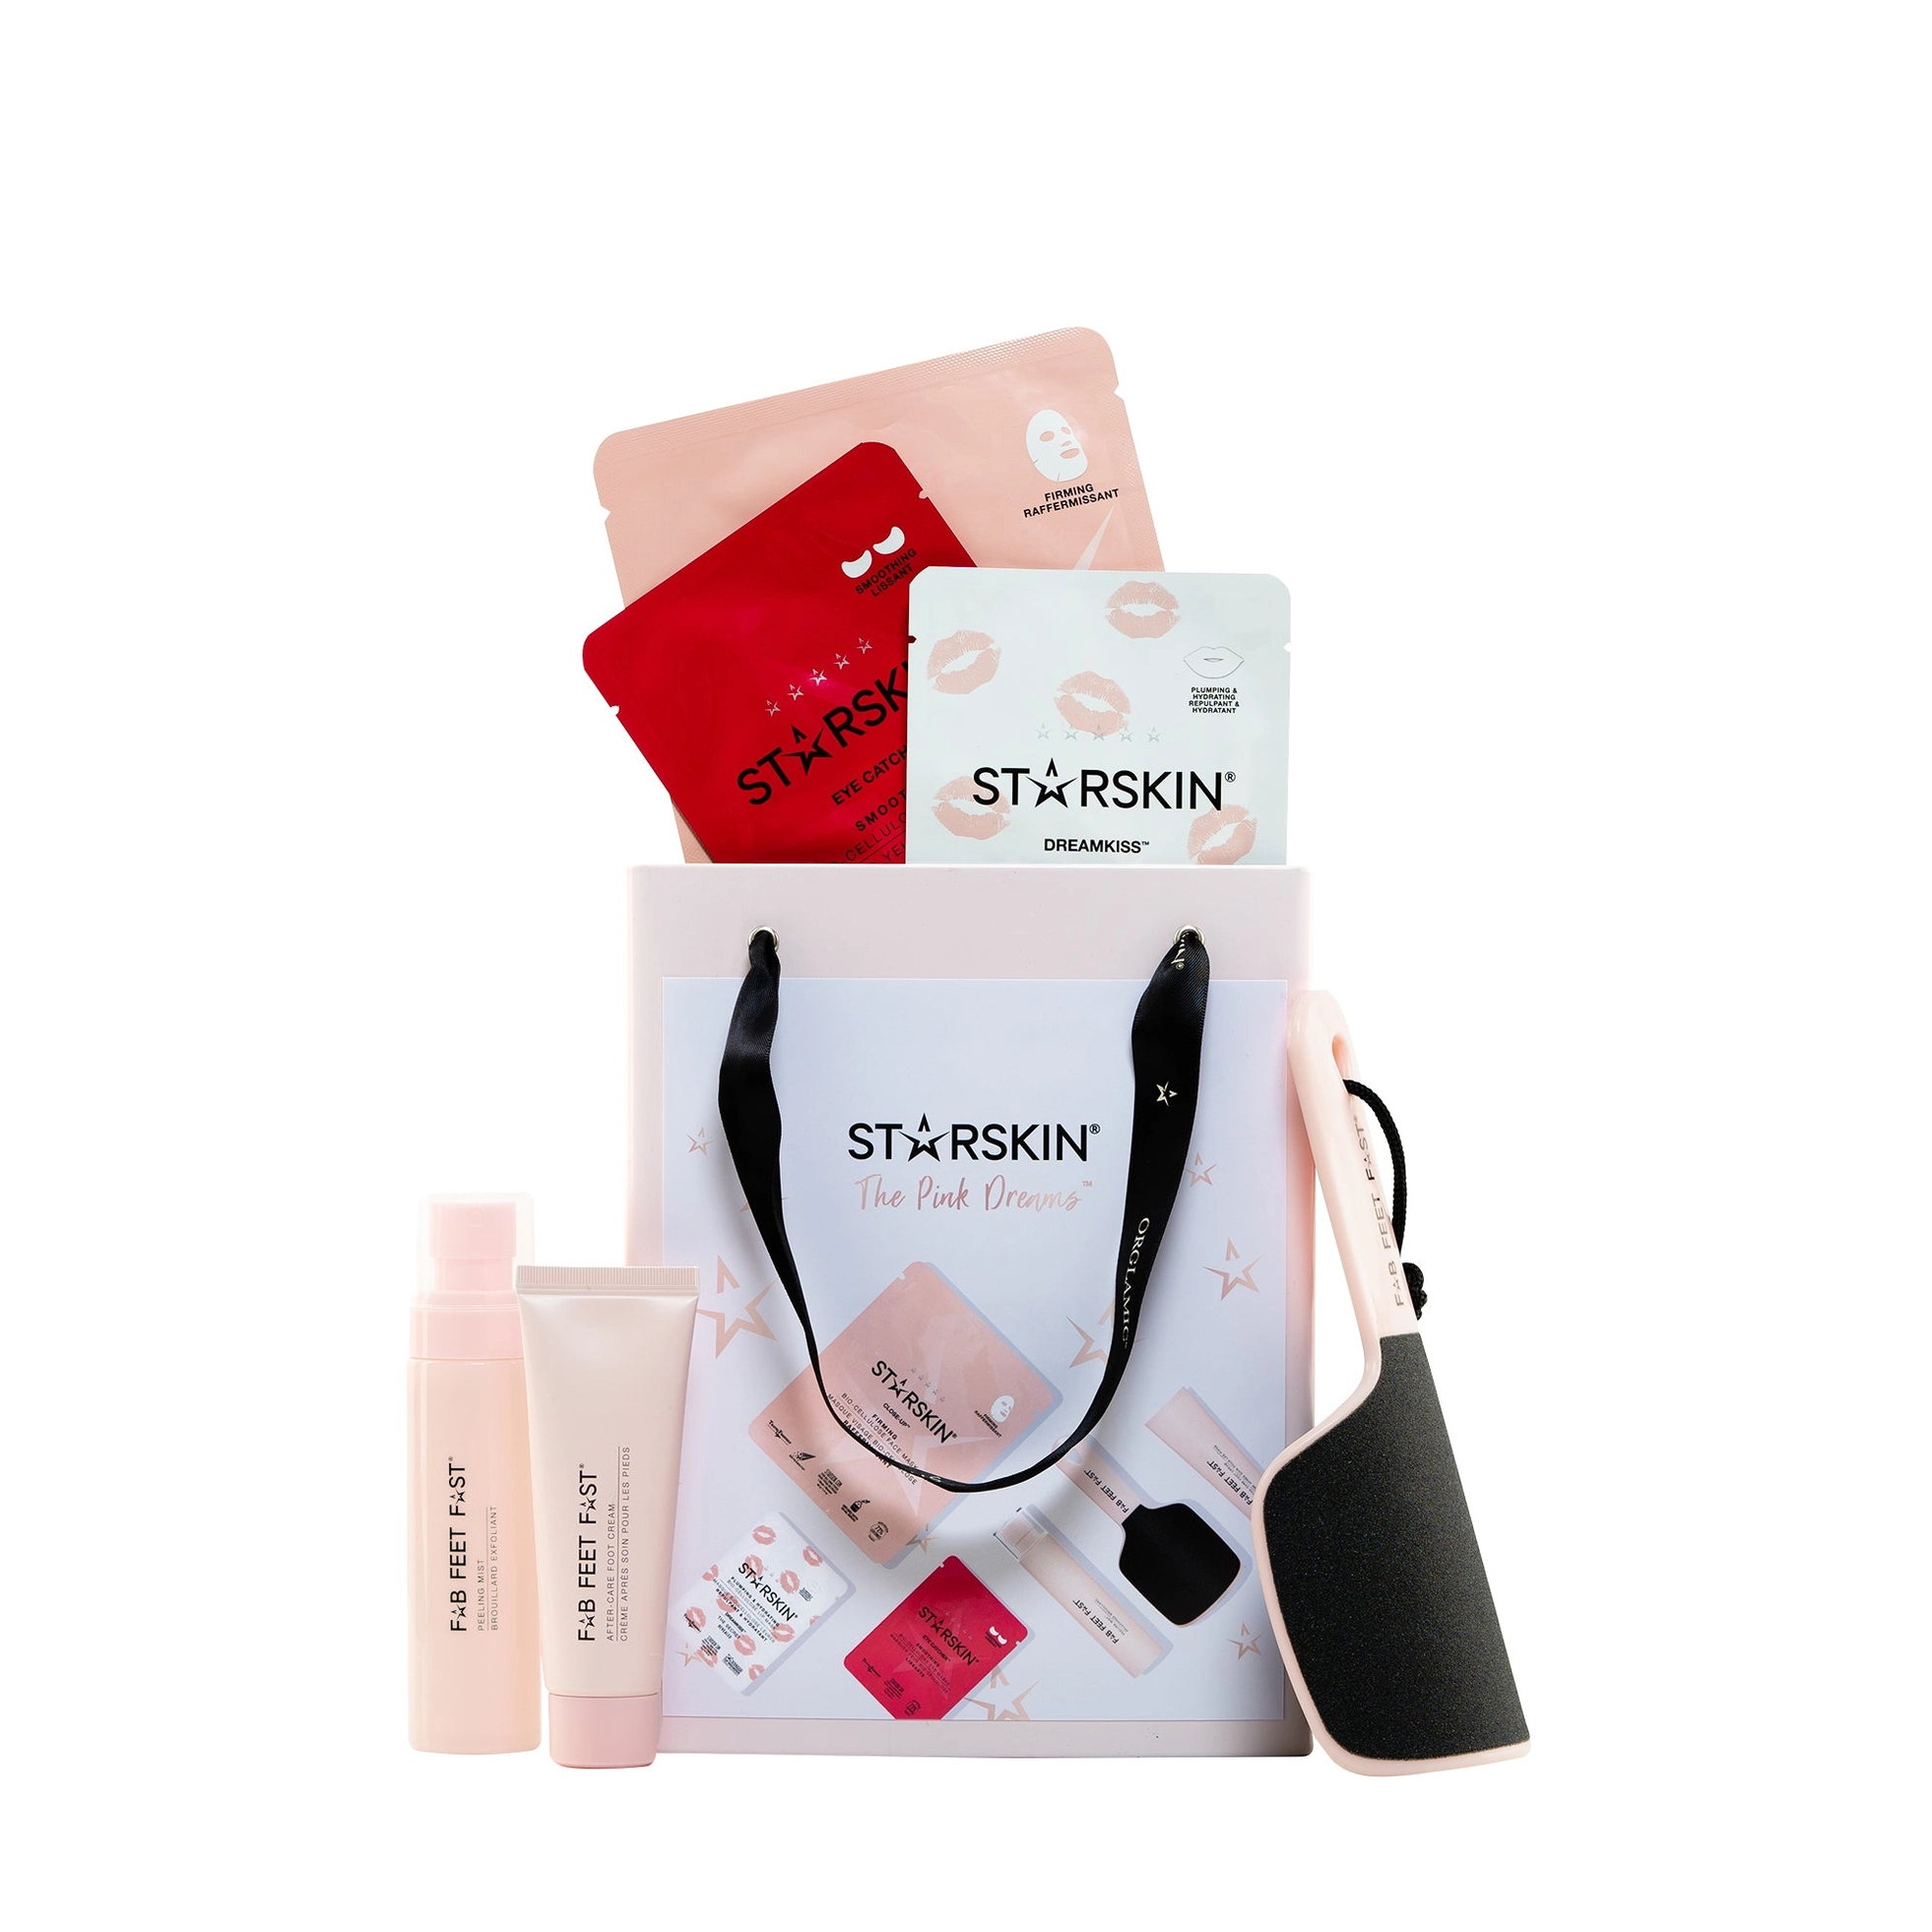 Star skin – the Pink Dreams – Giftset